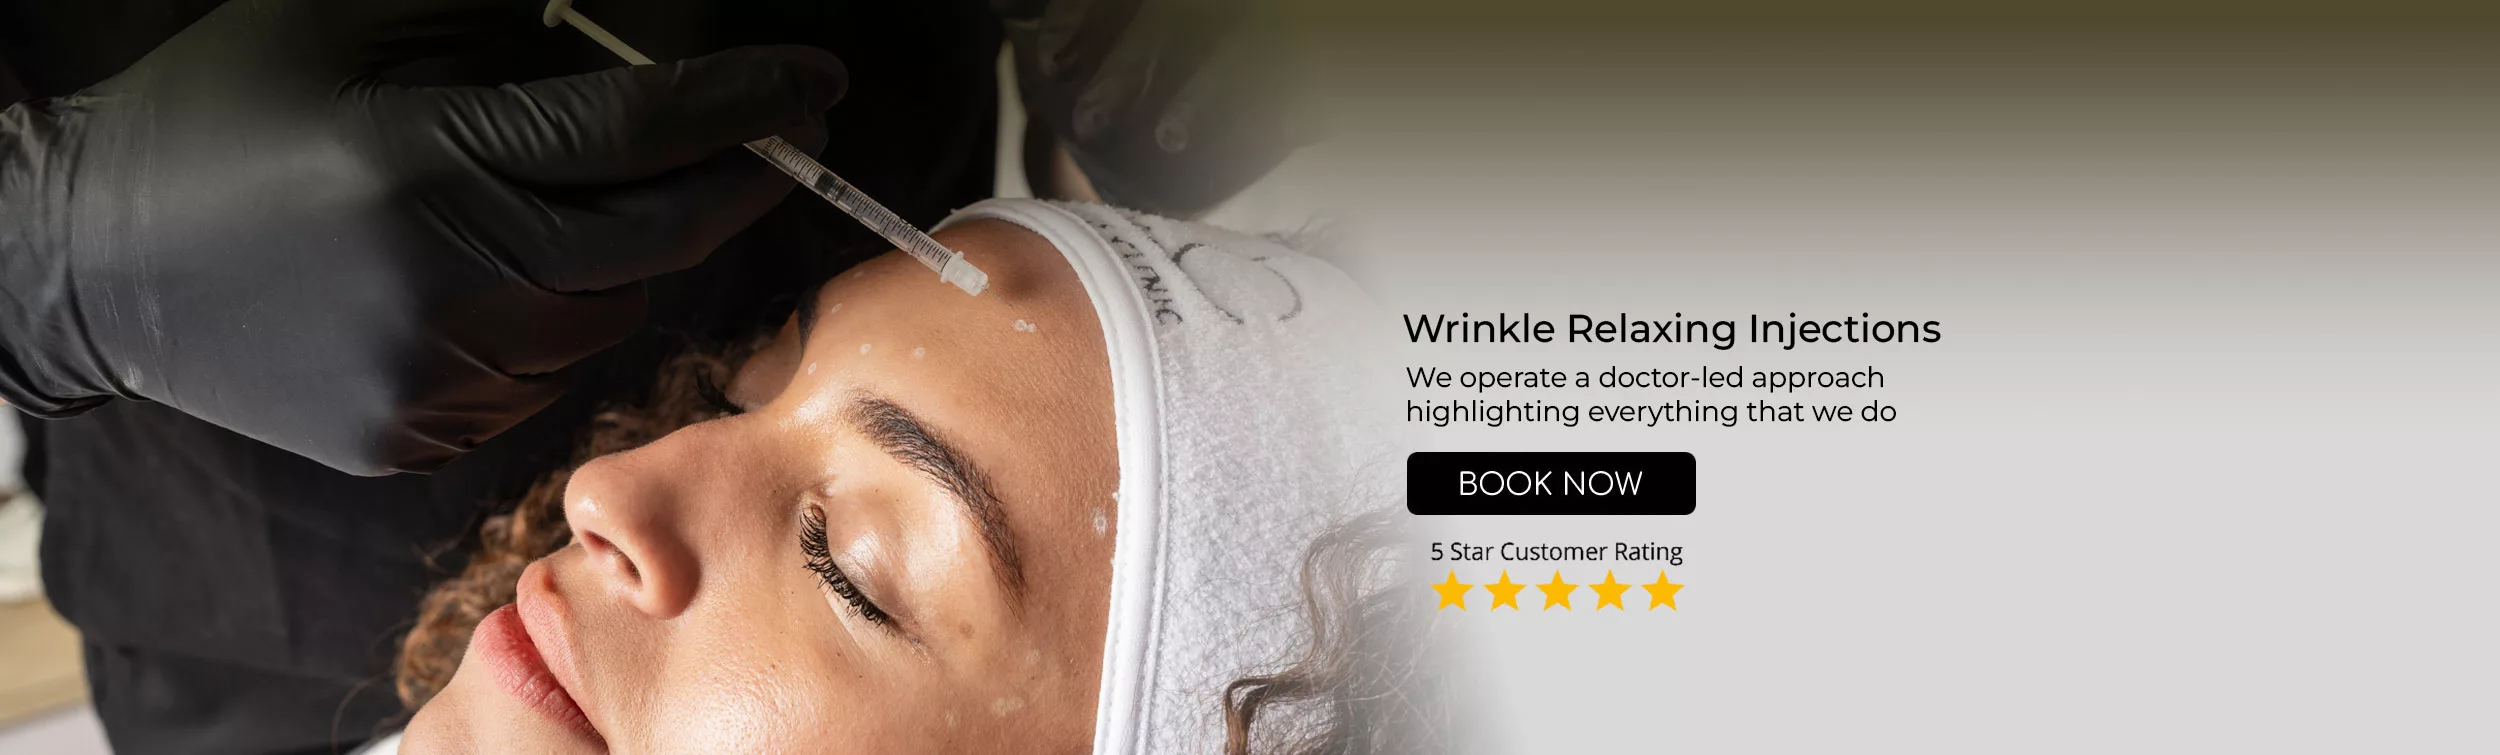 wrinkle-injections-Banner